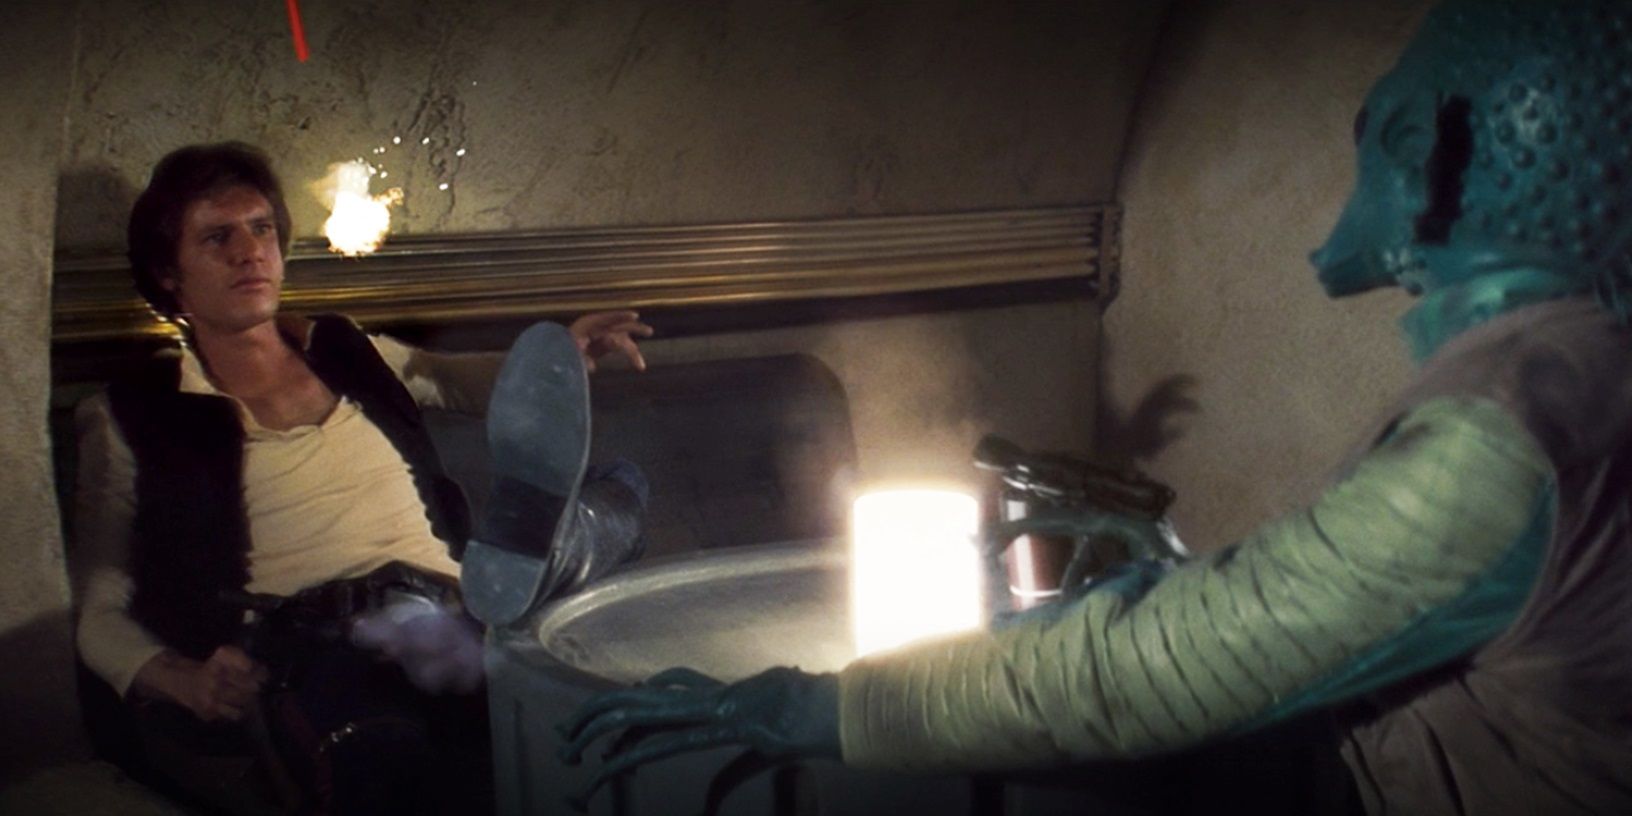 Han and Greedo's confrontation in Mos Eisley Cantina in Star Wars